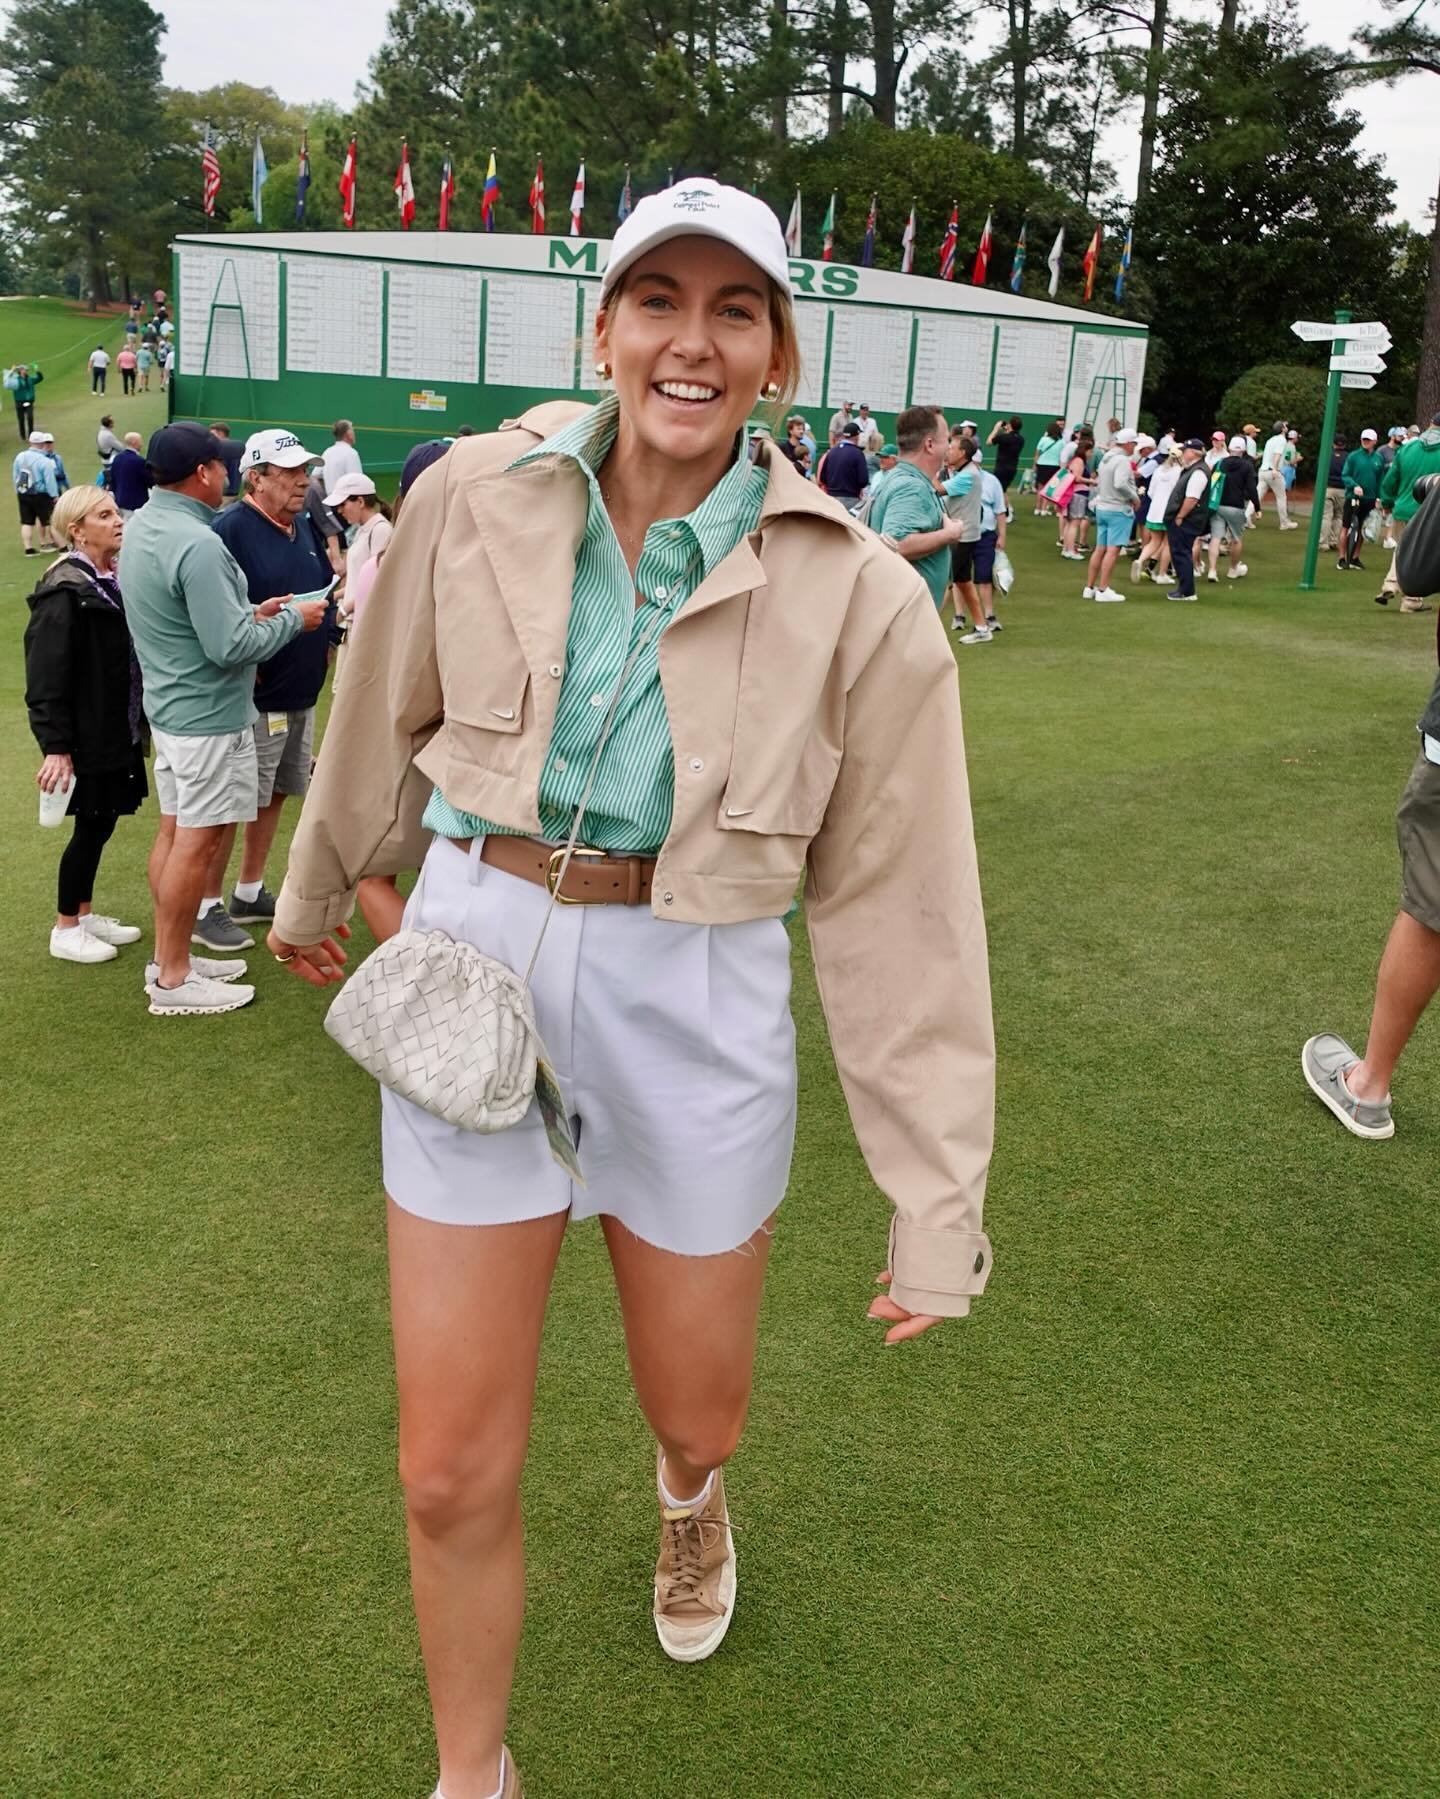 Full heart ➡️ full hands🥰  @theMasters &lsquo;24 LFG!
Thnx @alieaclark for hooking it up today! 💚